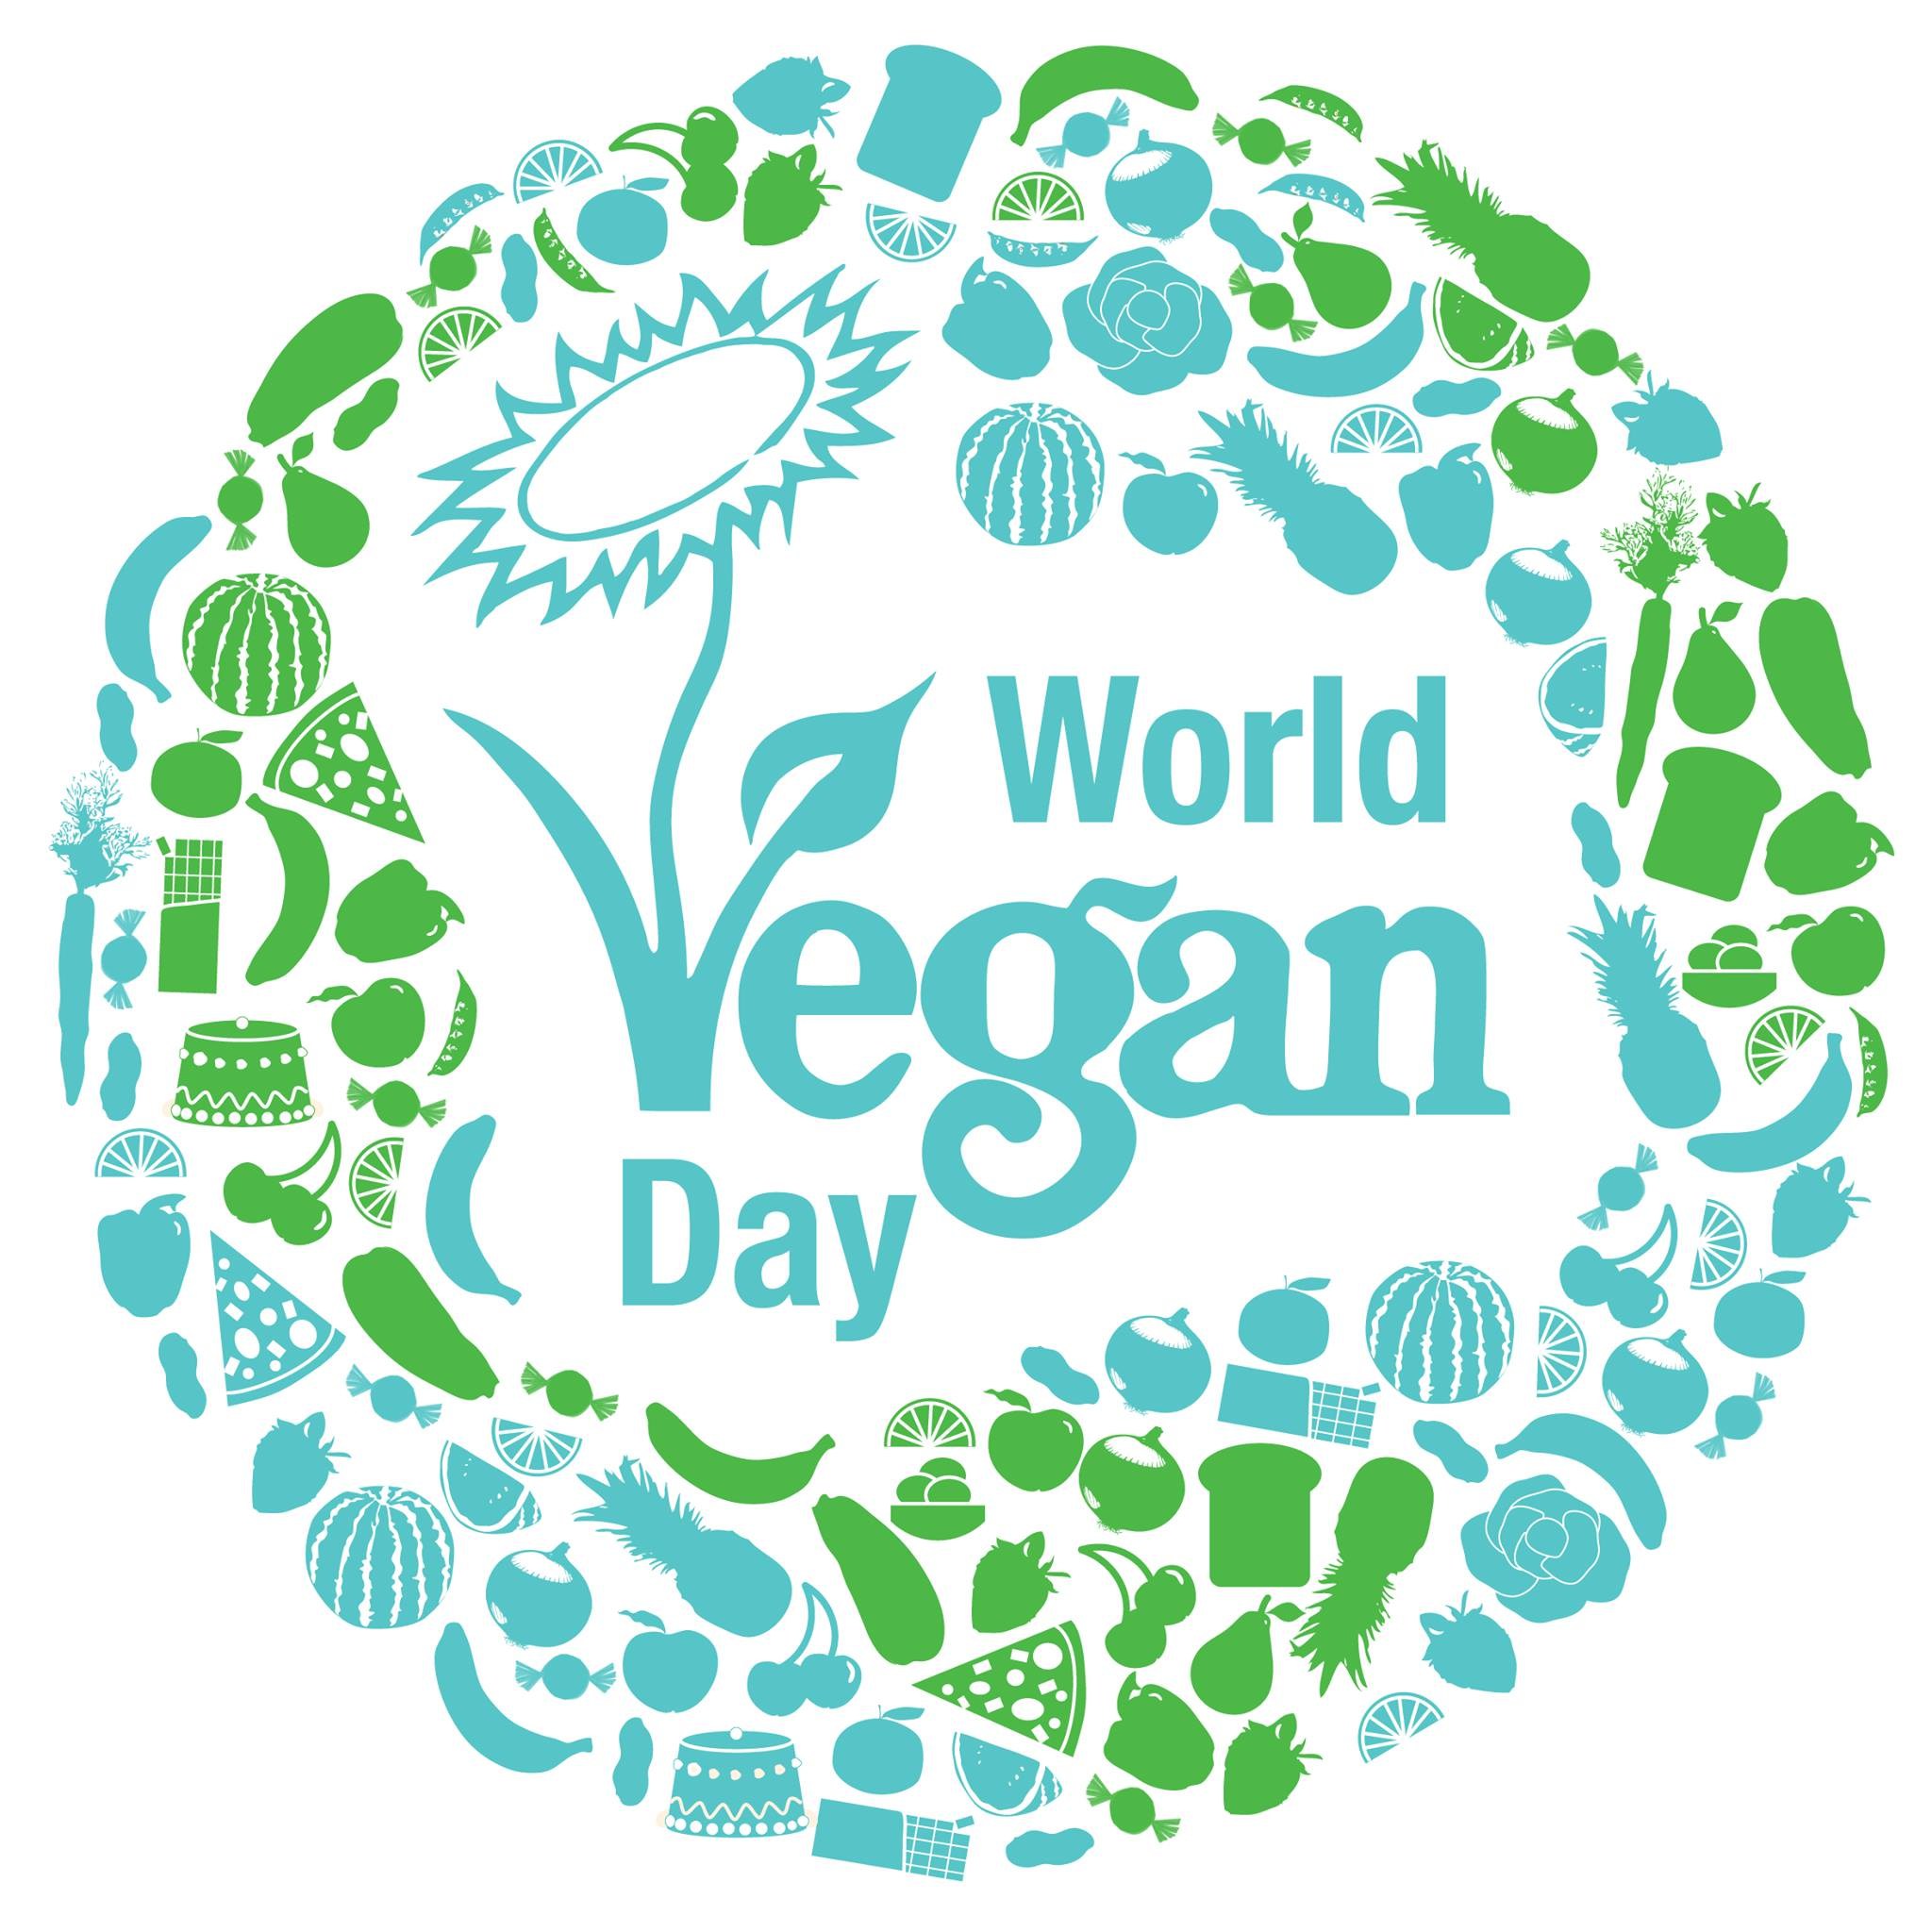 75 World Vegan Day 2018 Greeting Picture Ideas